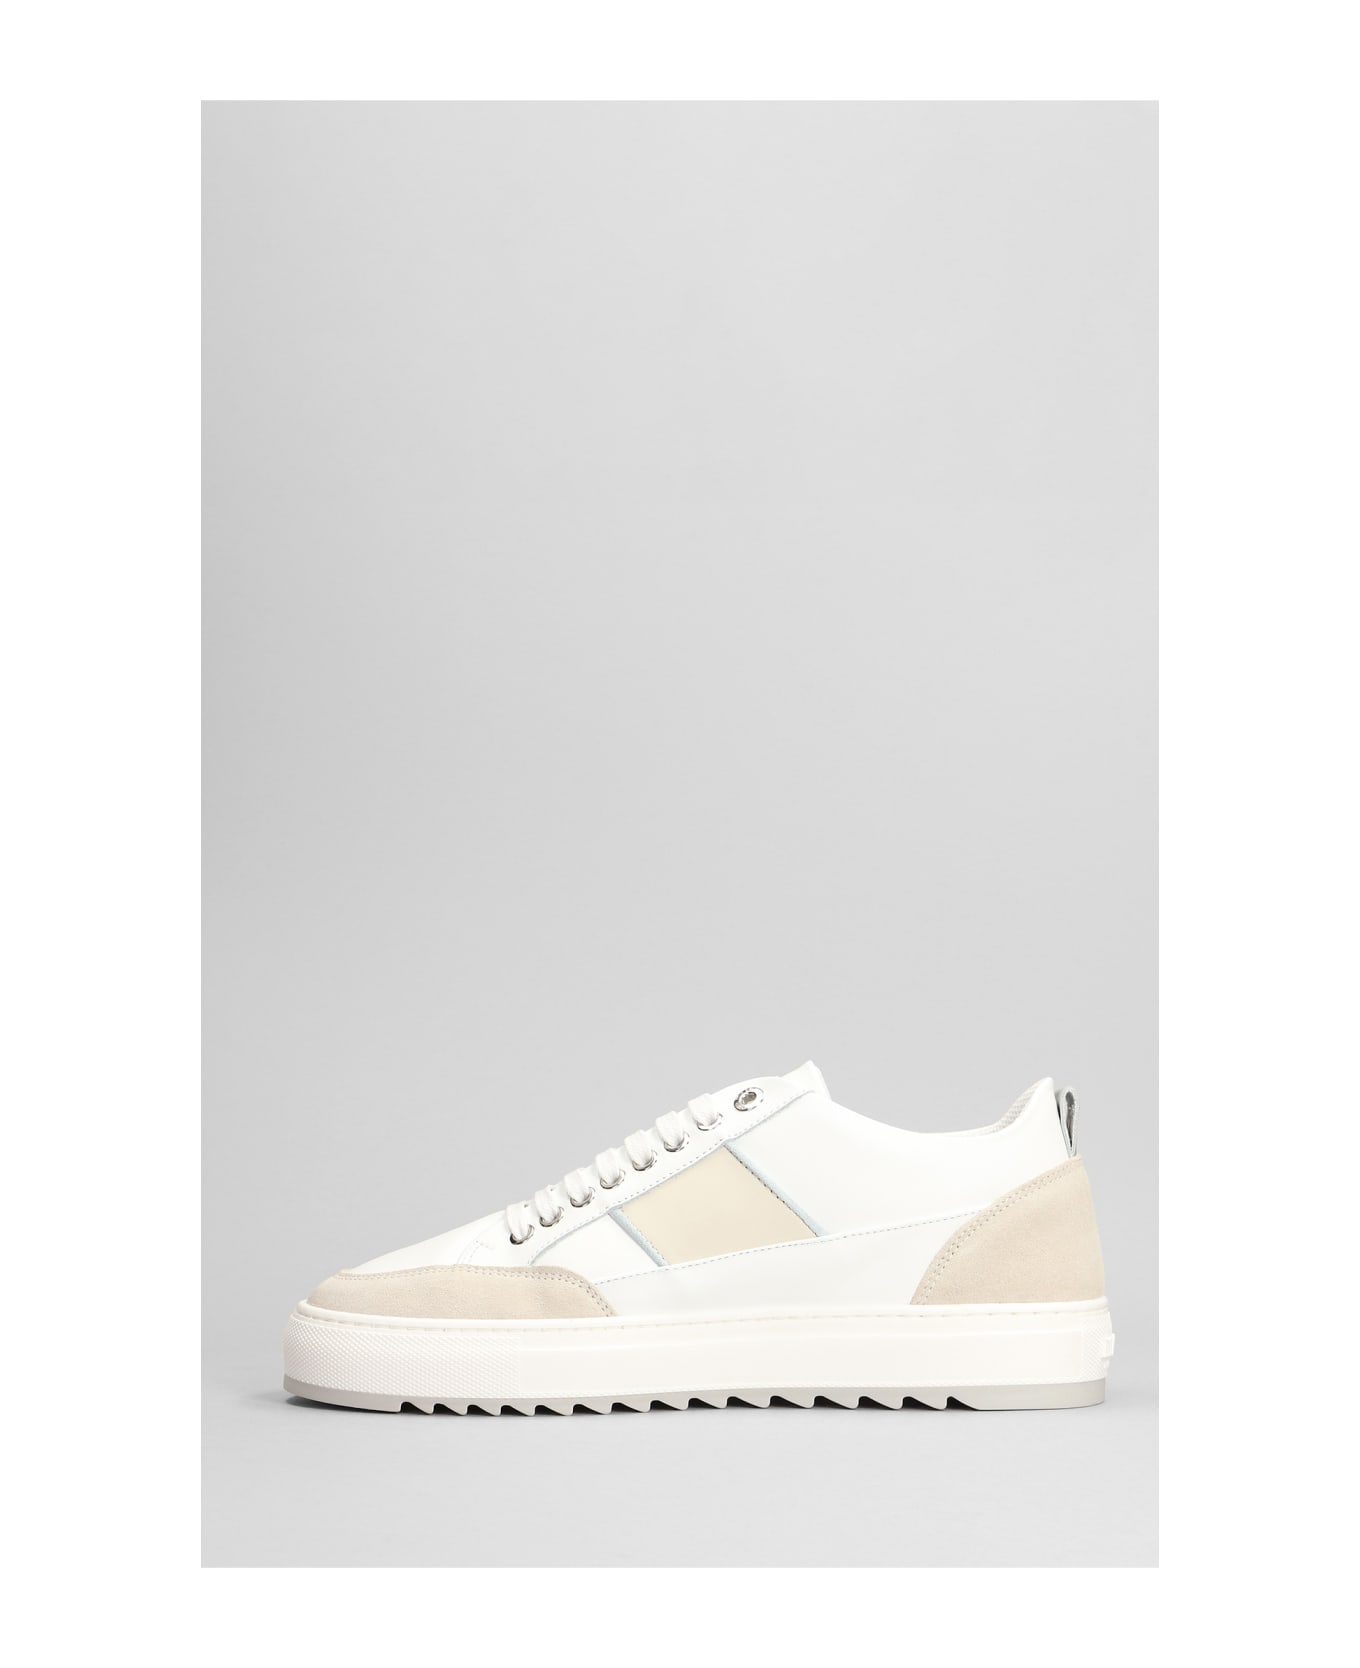 Mason Garments Tia Sneakers In White Suede And Leather - White